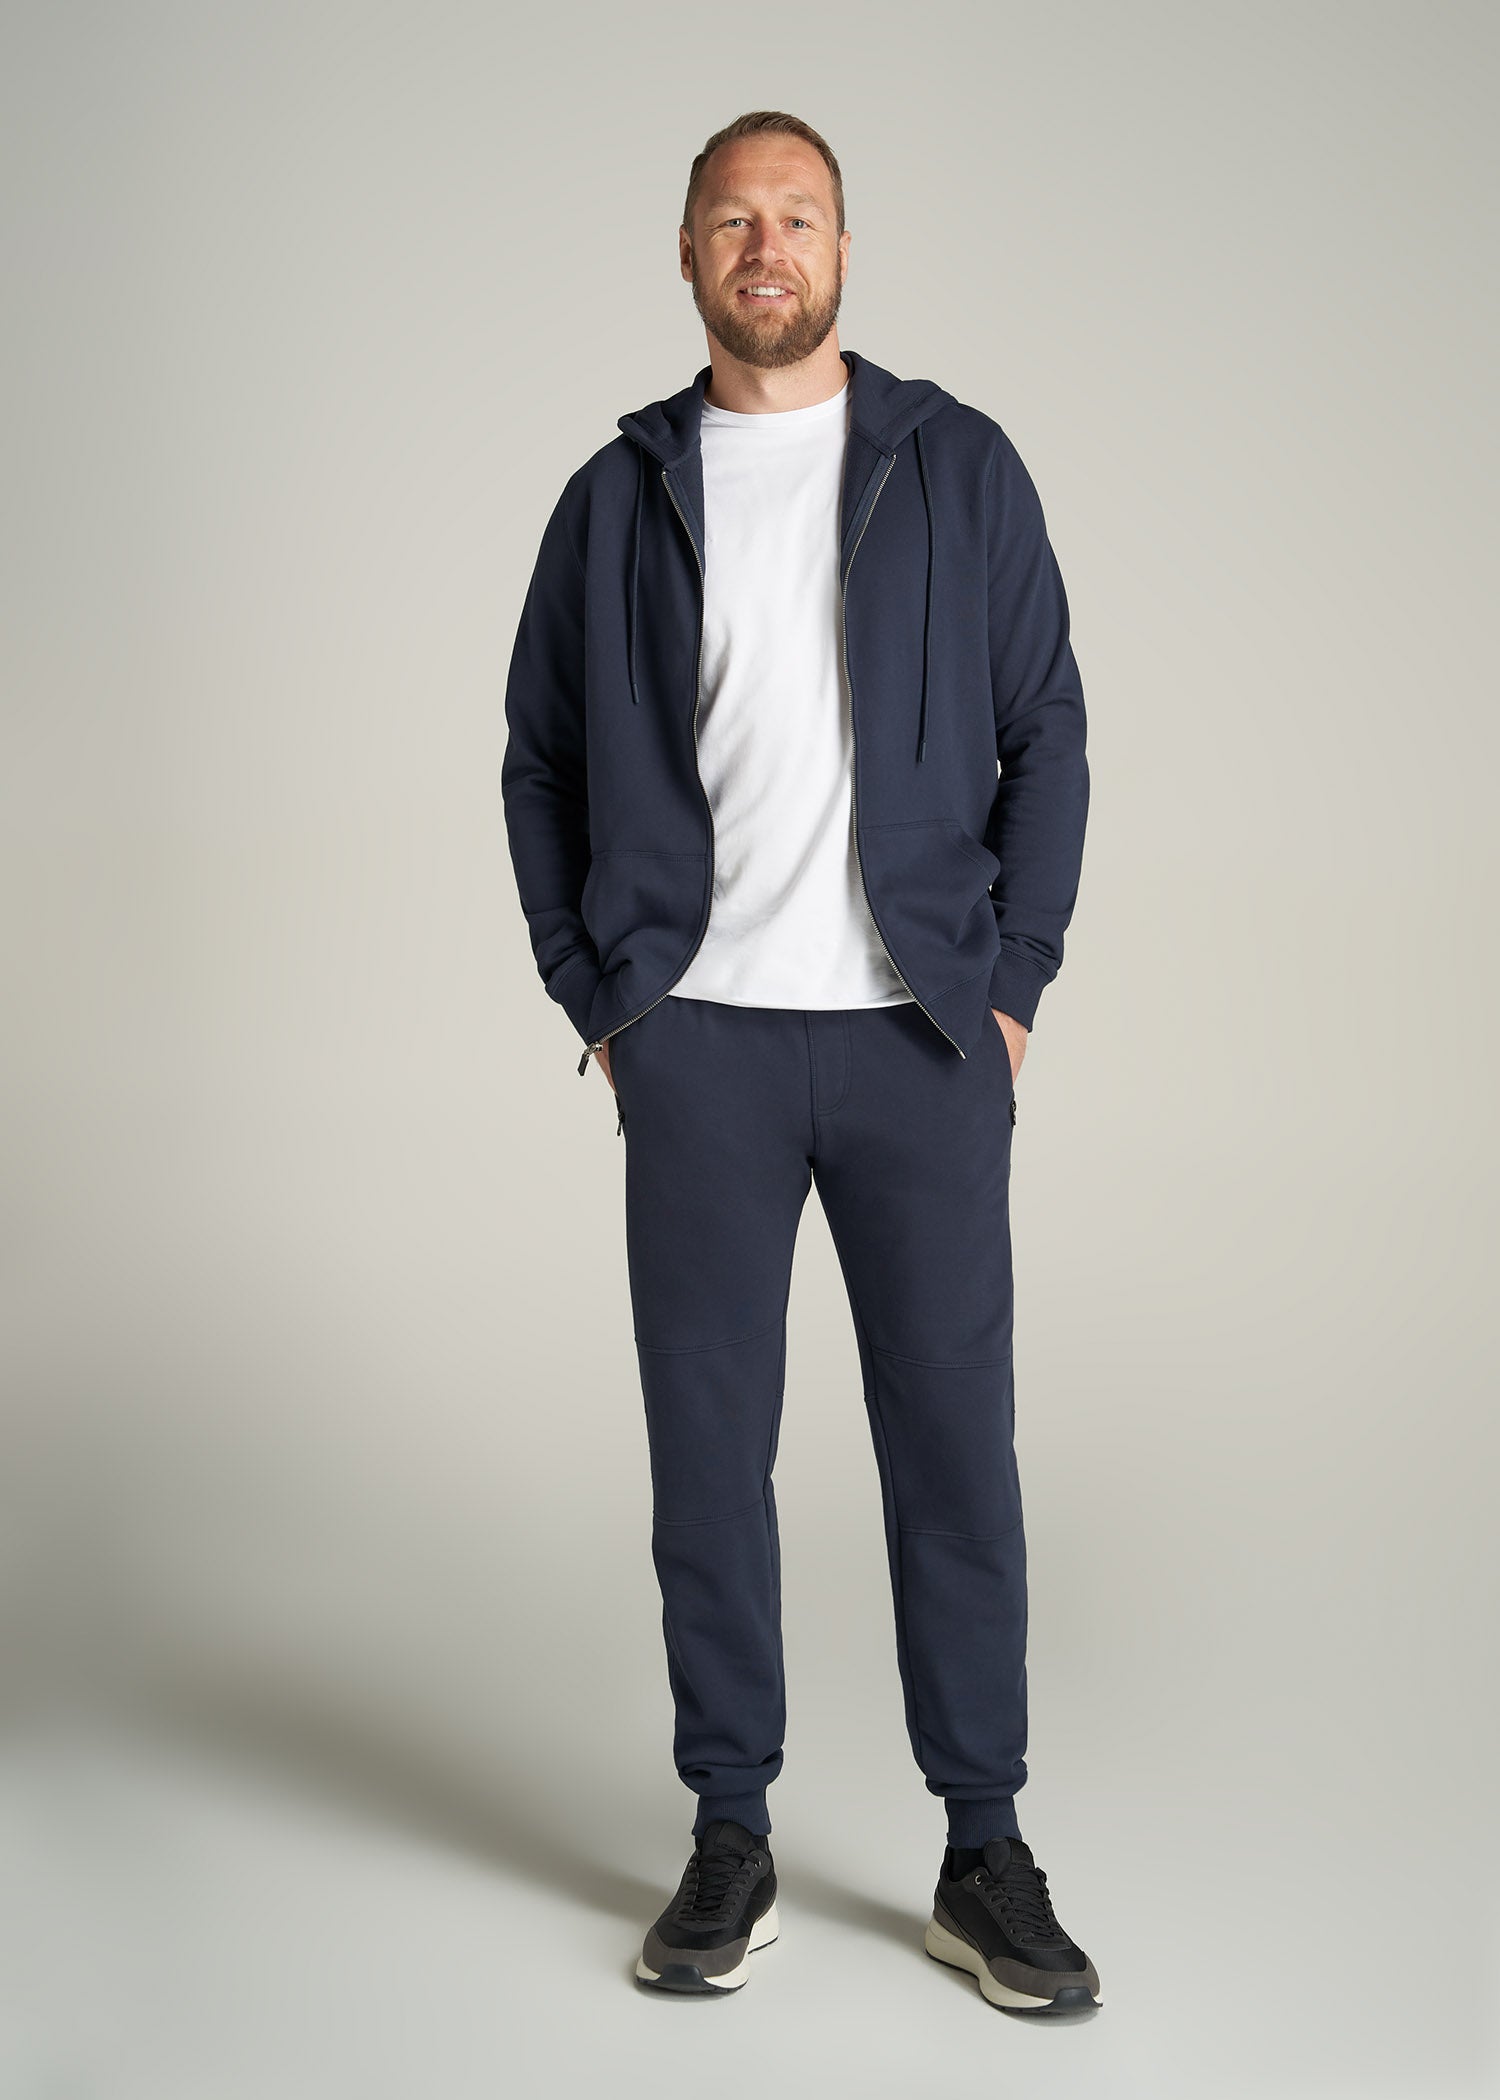 lululemon - The wait is over—ABC Joggers are back